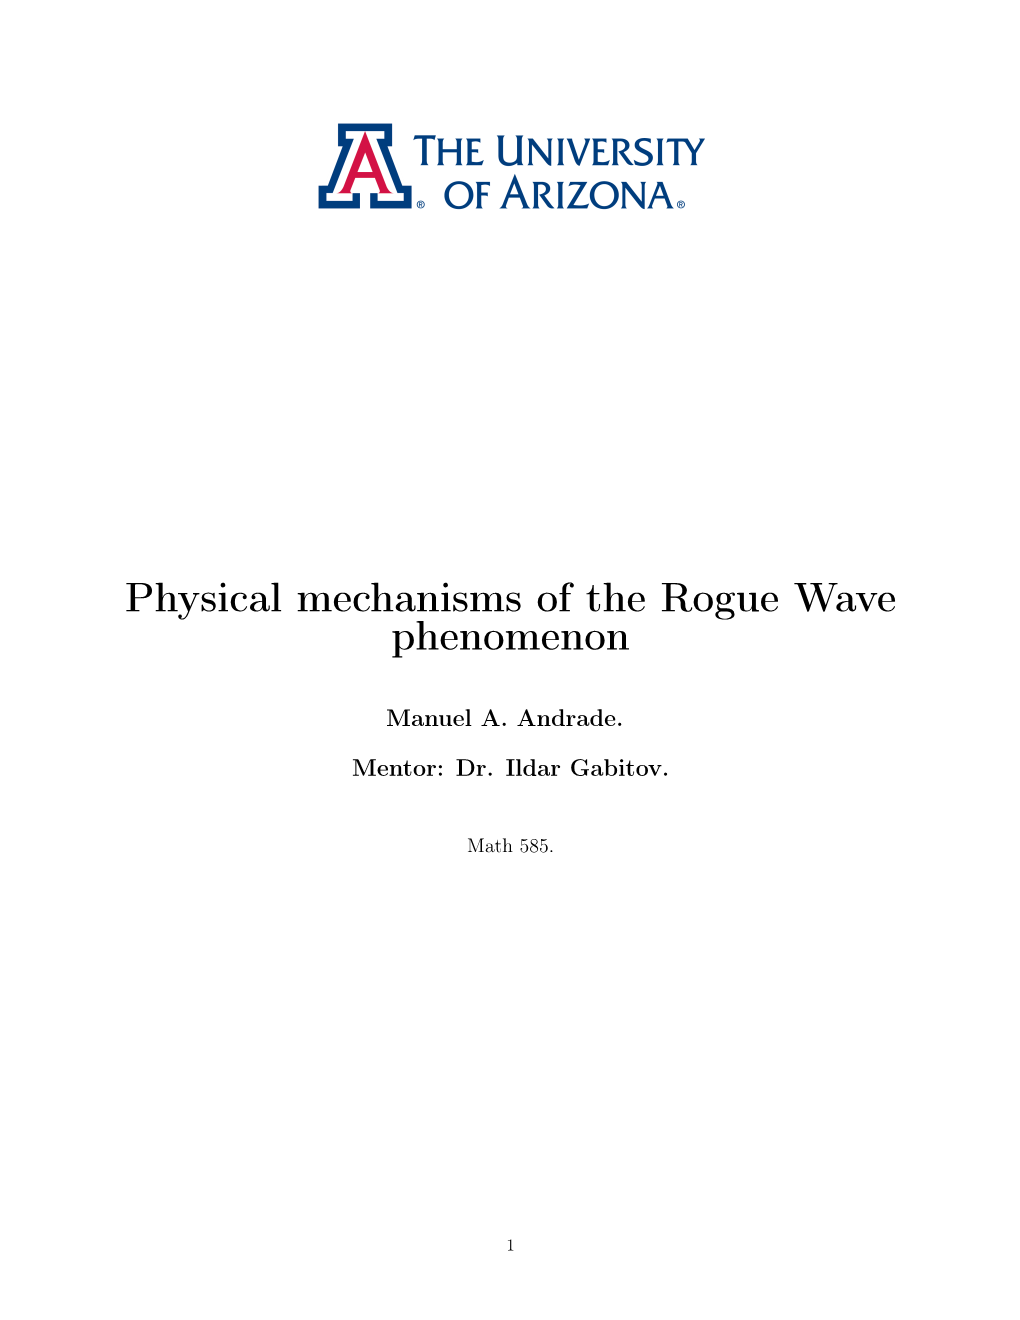 Physical Mechanisms of the Rogue Wave Phenomenon